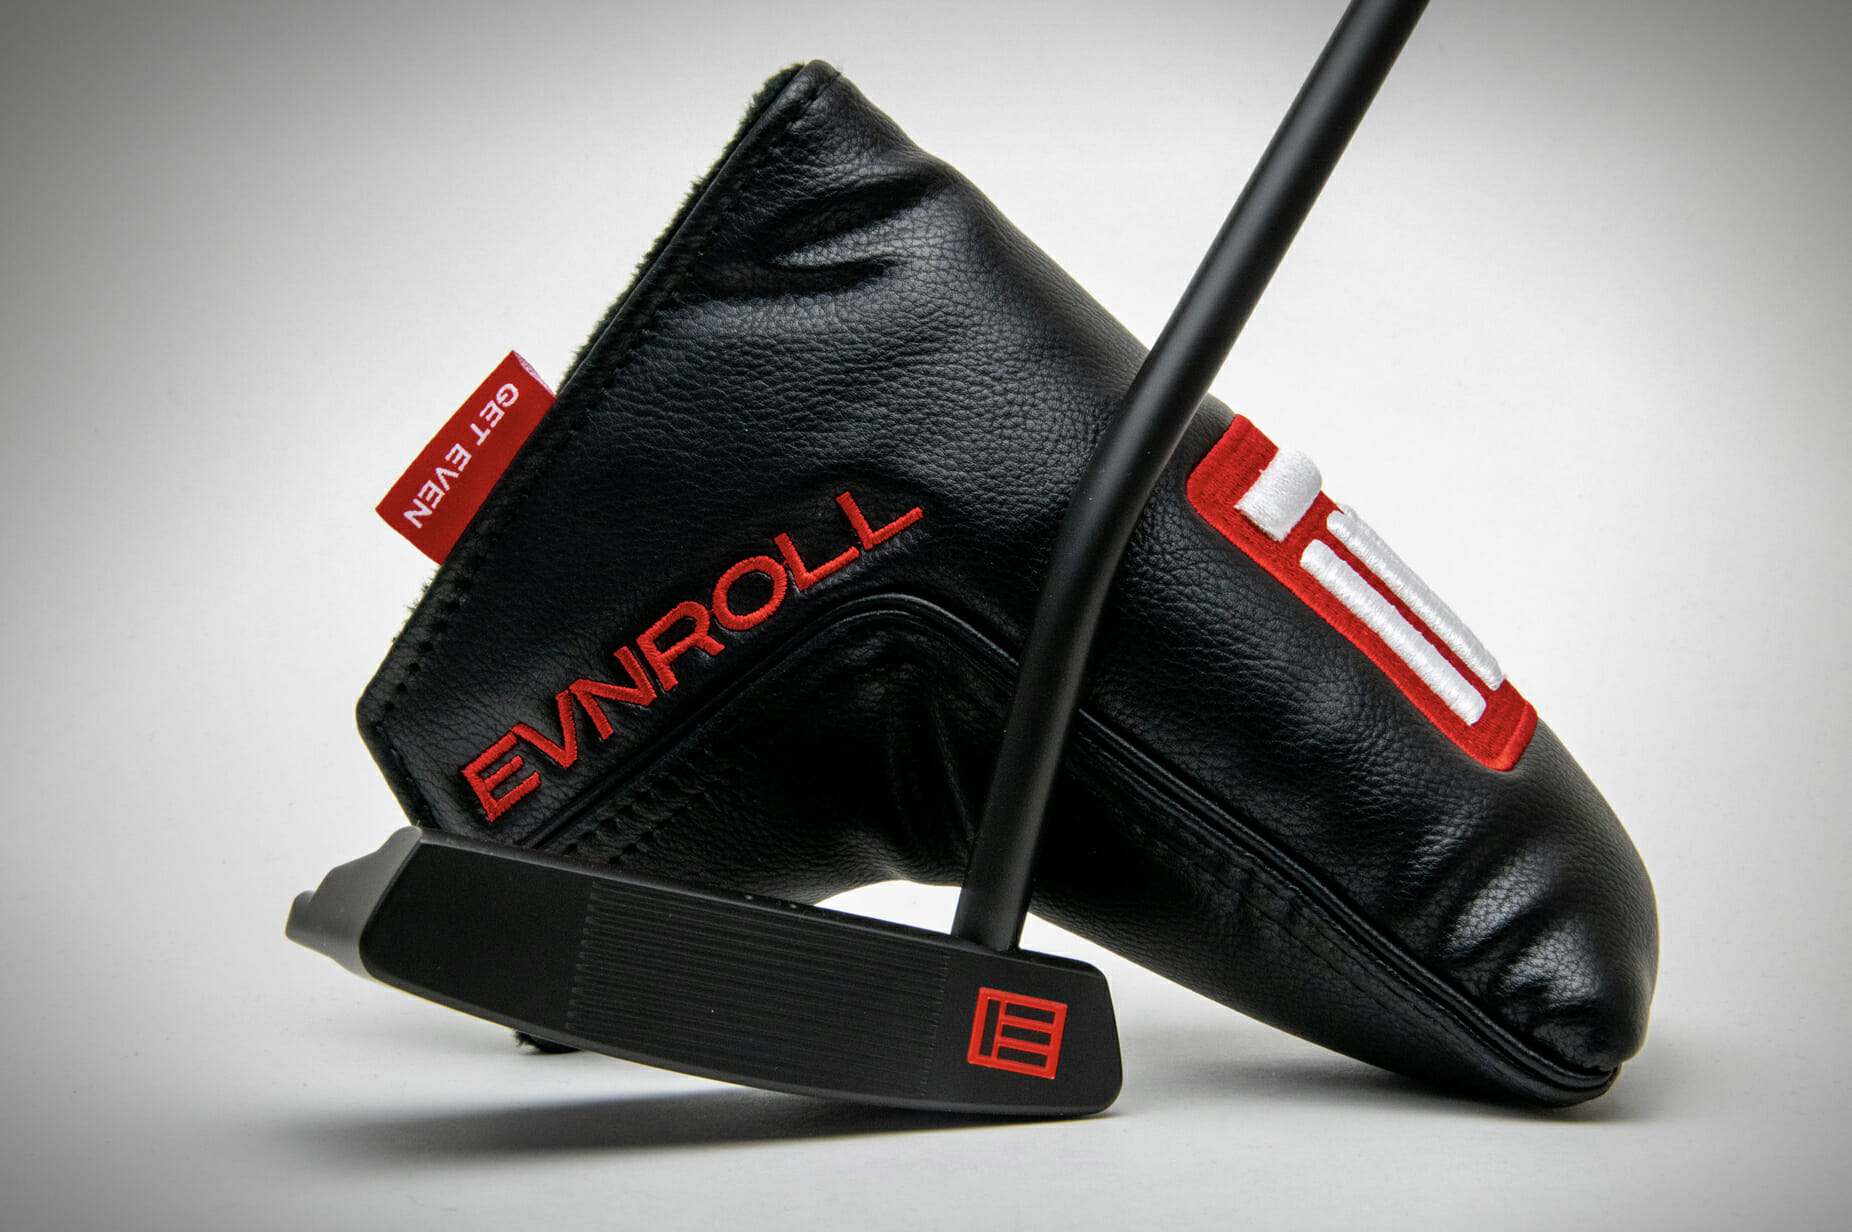 Breathe life into your putting with Evnroll’s ‘Murdered Out’ ER2